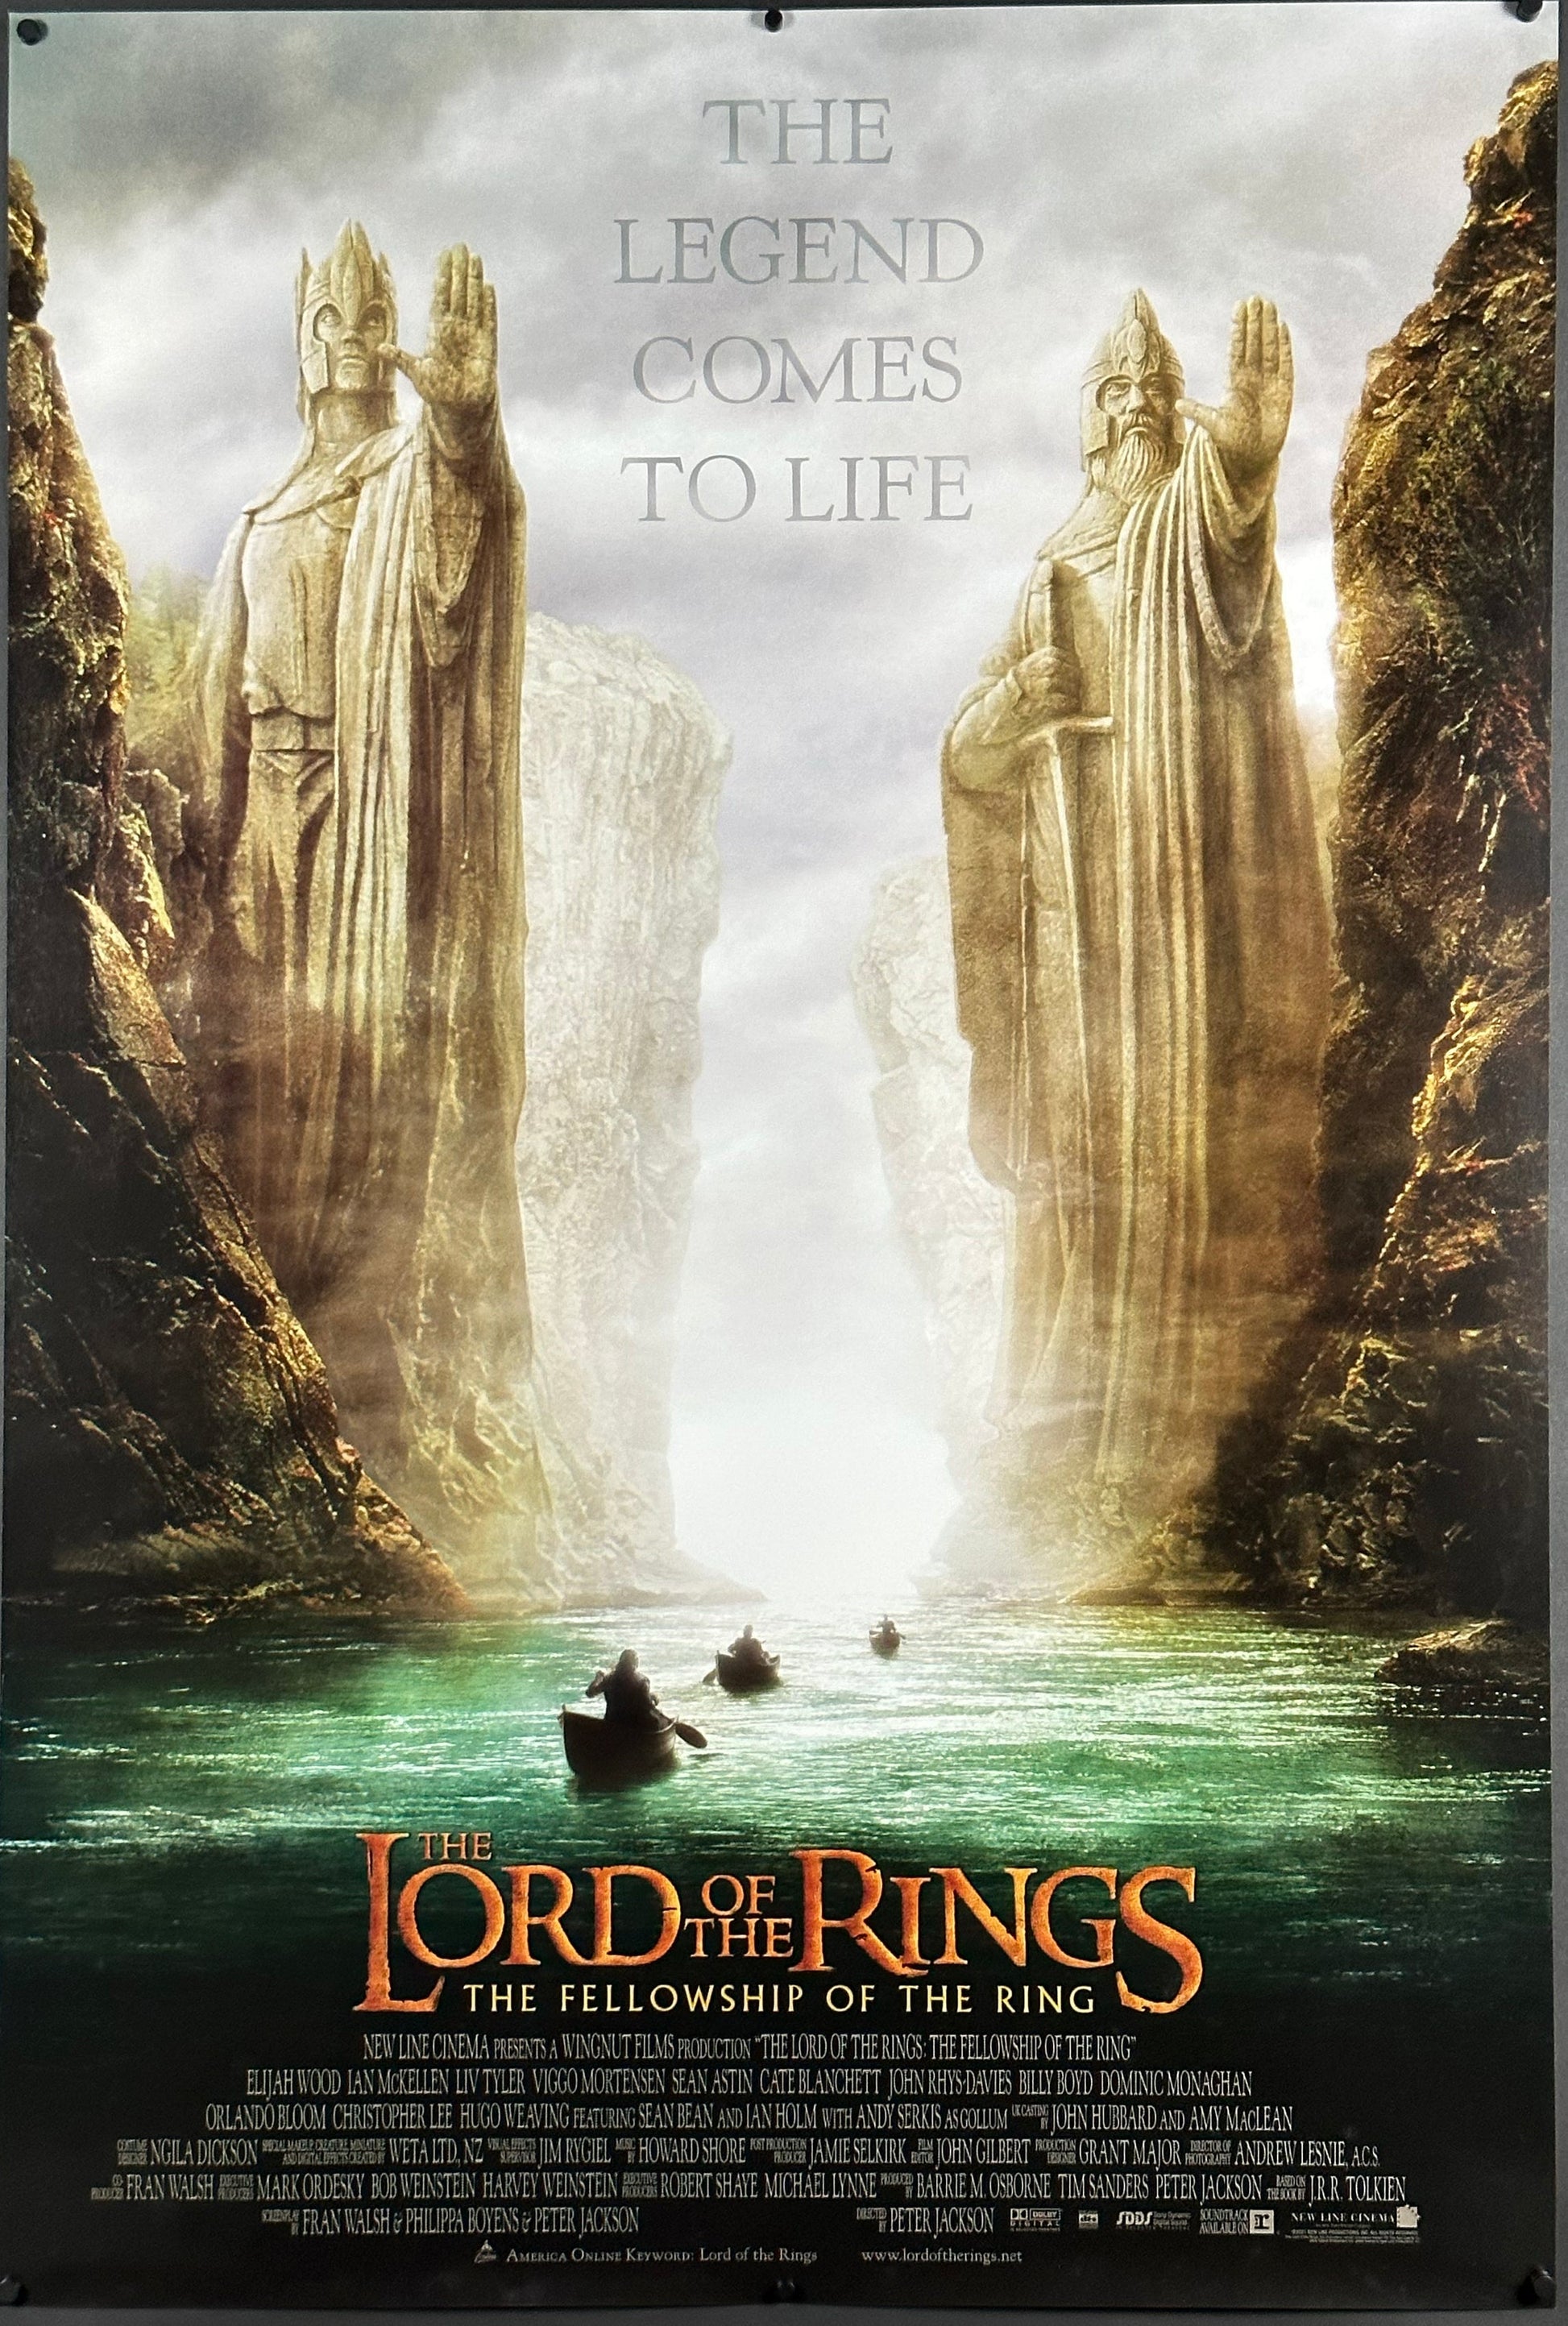 The Lord Of The Rings: The Fellowship Of The Ring US One Sheet (2001) - ORIGINAL RELEASE - posterpalace.com